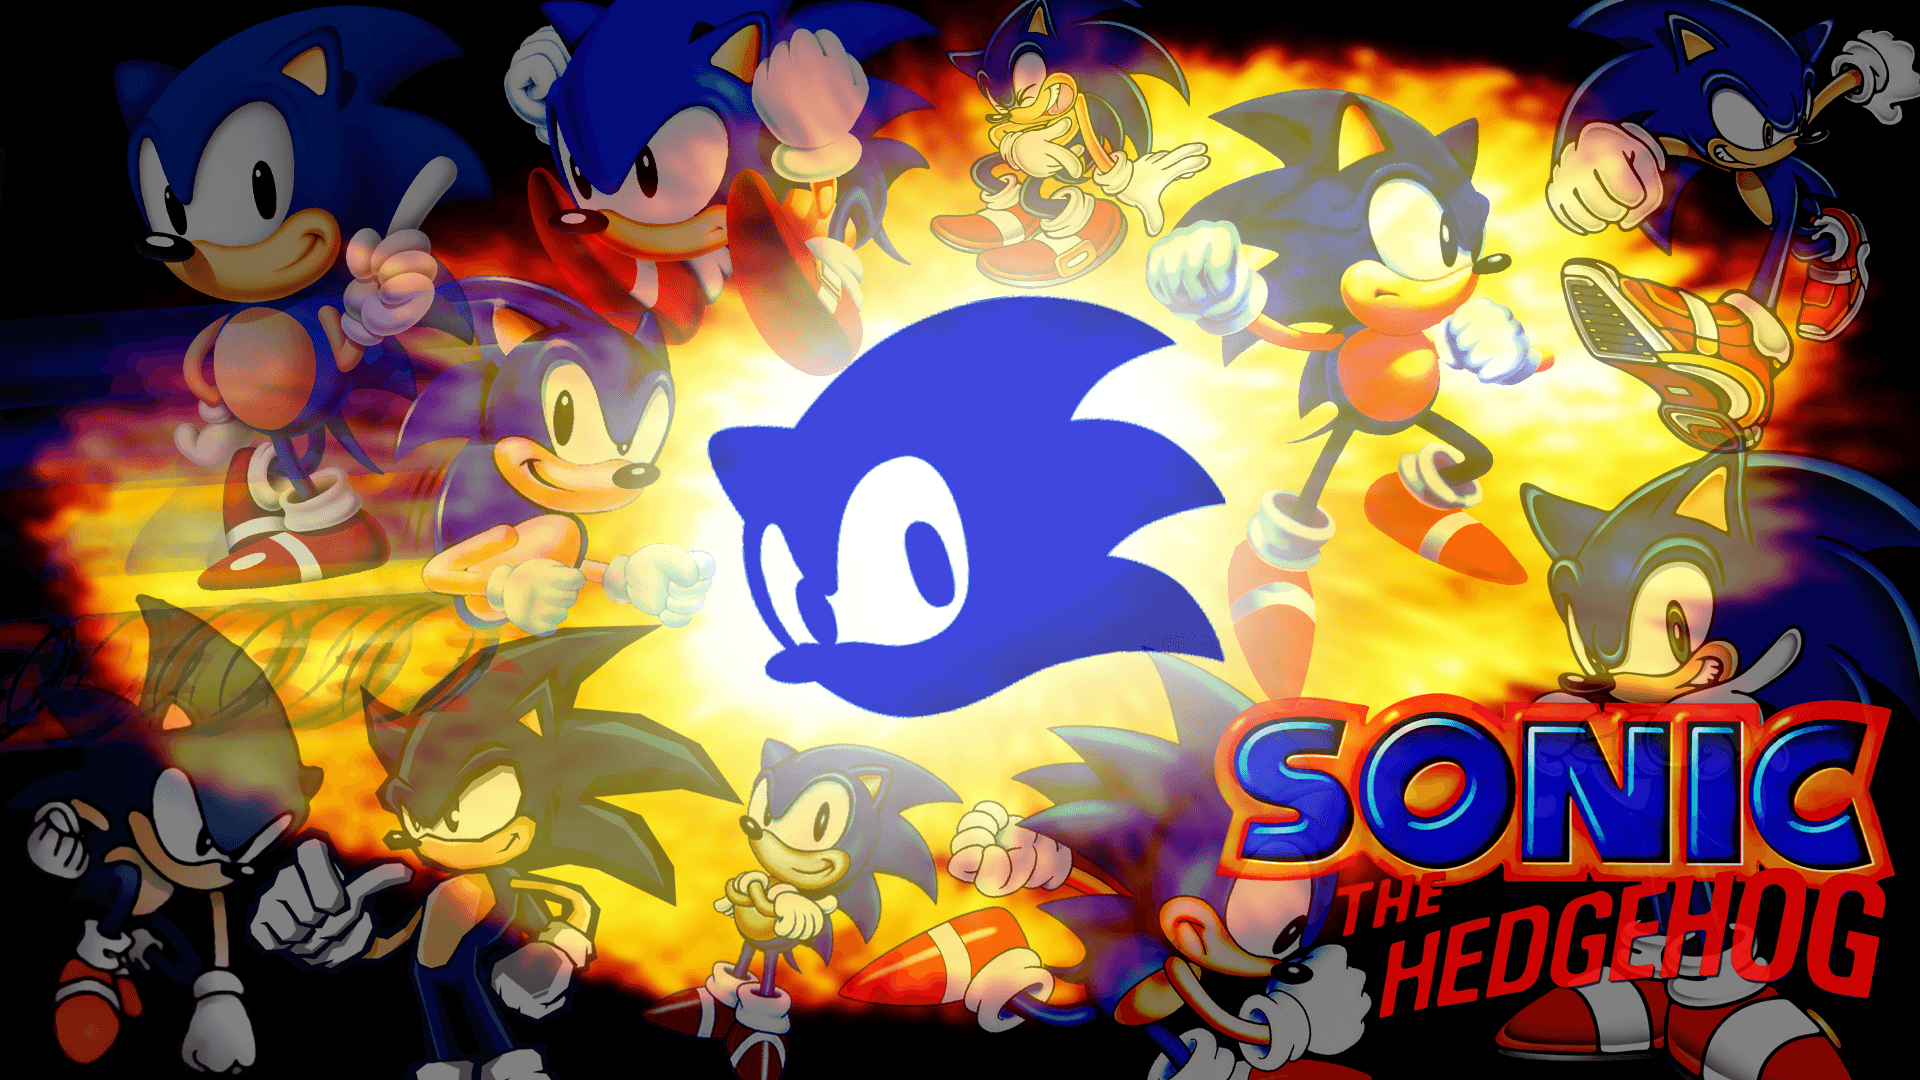 Sonic The Hedgehog Wallpaper, Picture, Image